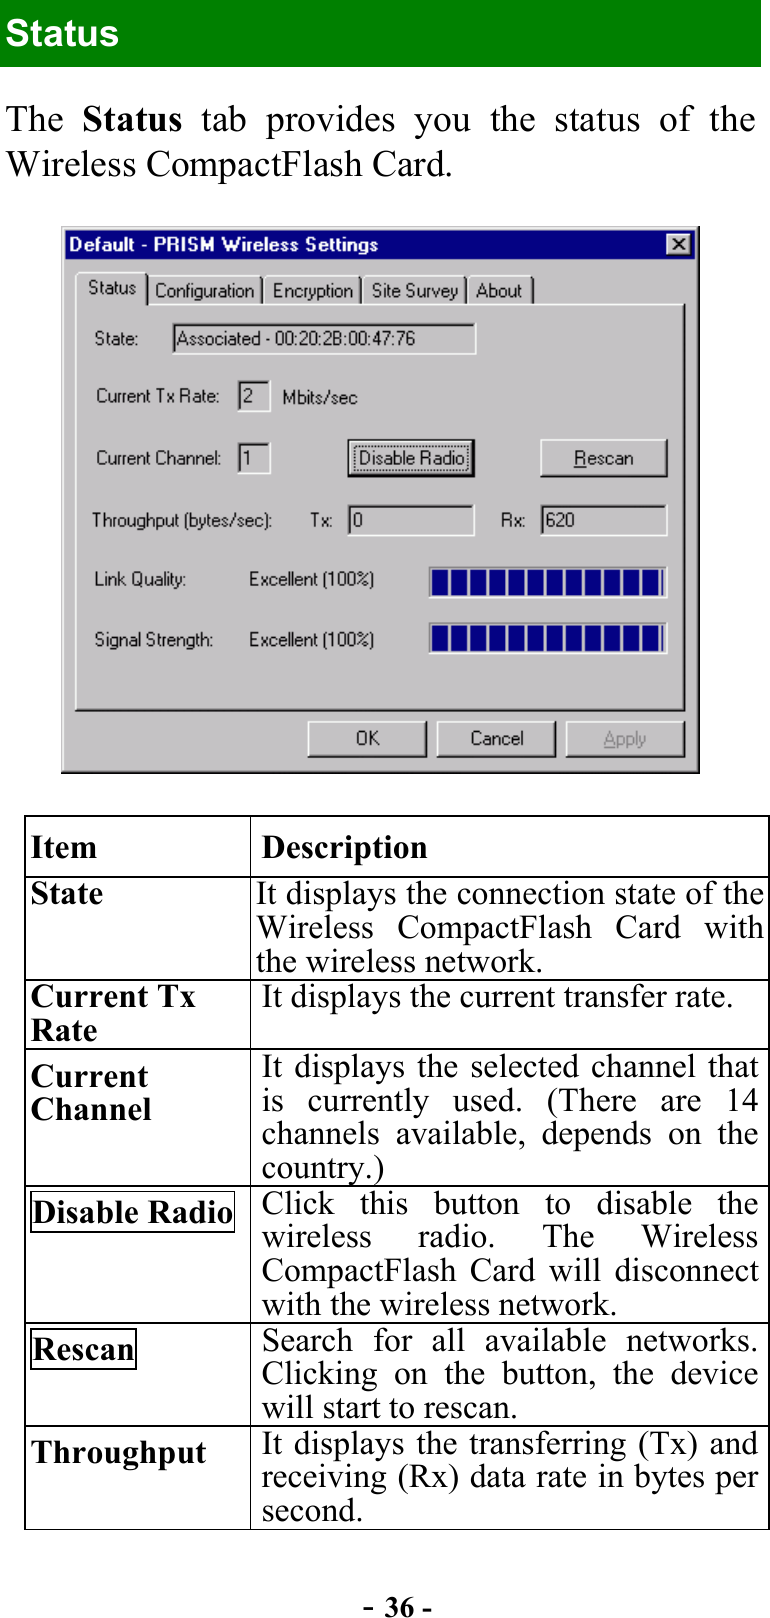  - 36 - Status The  Status tab provides you the status of the Wireless CompactFlash Card.  Item Description State  It displays the connection state of the Wireless CompactFlash Card with the wireless network. Current Tx Rate It displays the current transfer rate. Current Channel It displays the selected channel that is currently used. (There are 14 channels available, depends on the country.) Disable Radio  Click this button to disable the wireless radio. The Wireless CompactFlash Card will disconnect with the wireless network. Rescan  Search for all available networks. Clicking on the button, the device will start to rescan. Throughput  It displays the transferring (Tx) and receiving (Rx) data rate in bytes per second. 